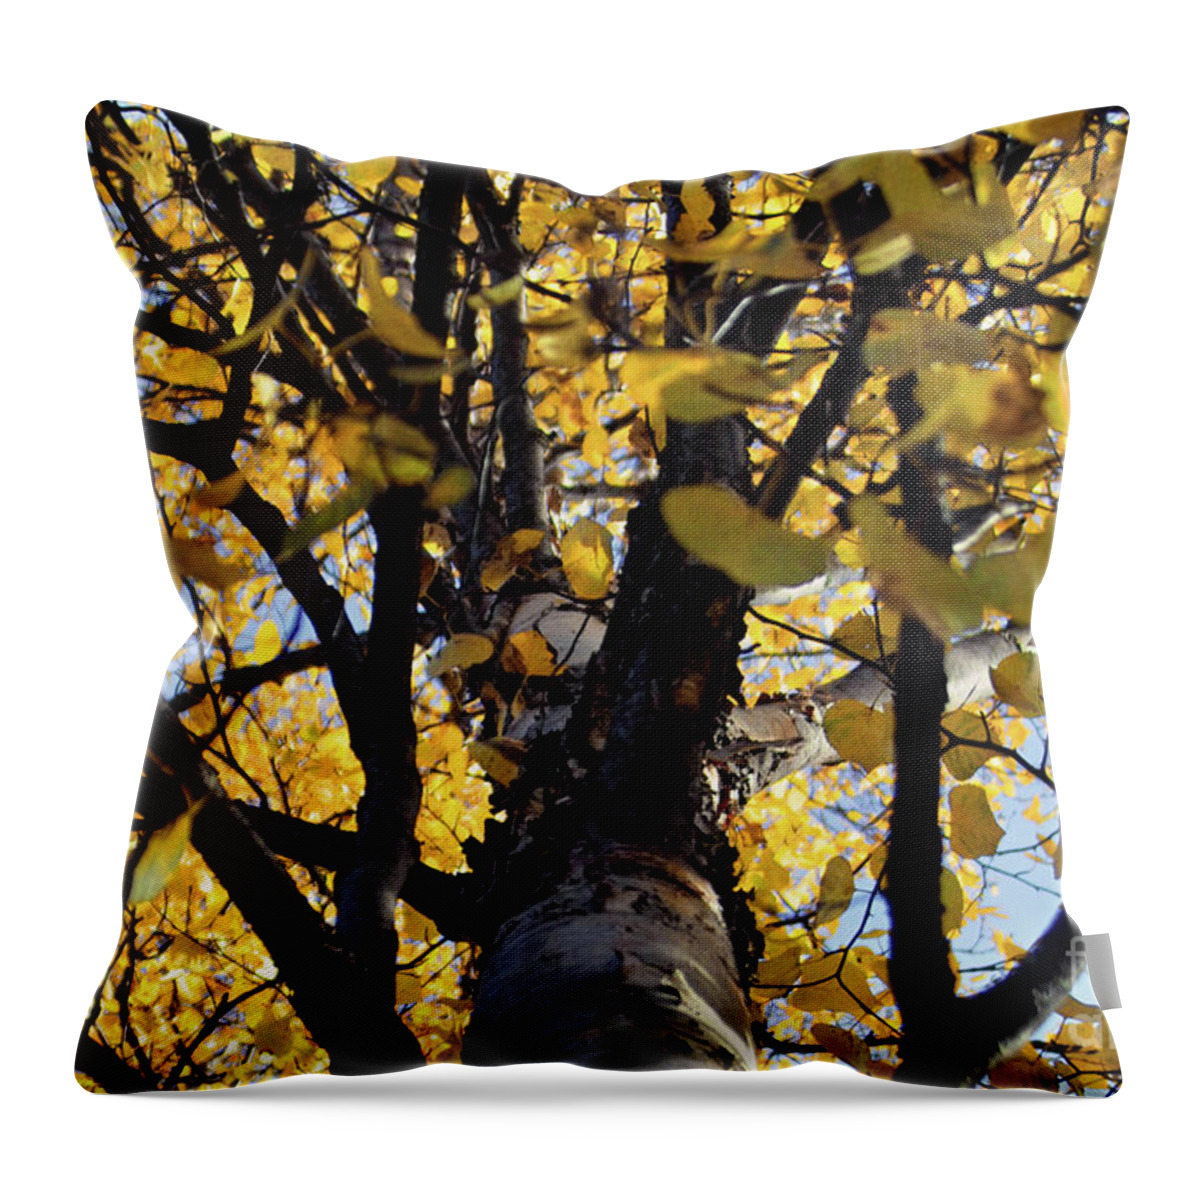 Yellow Throw Pillow featuring the photograph Yellow Aspen Looking Up by Kimberly Blom-Roemer